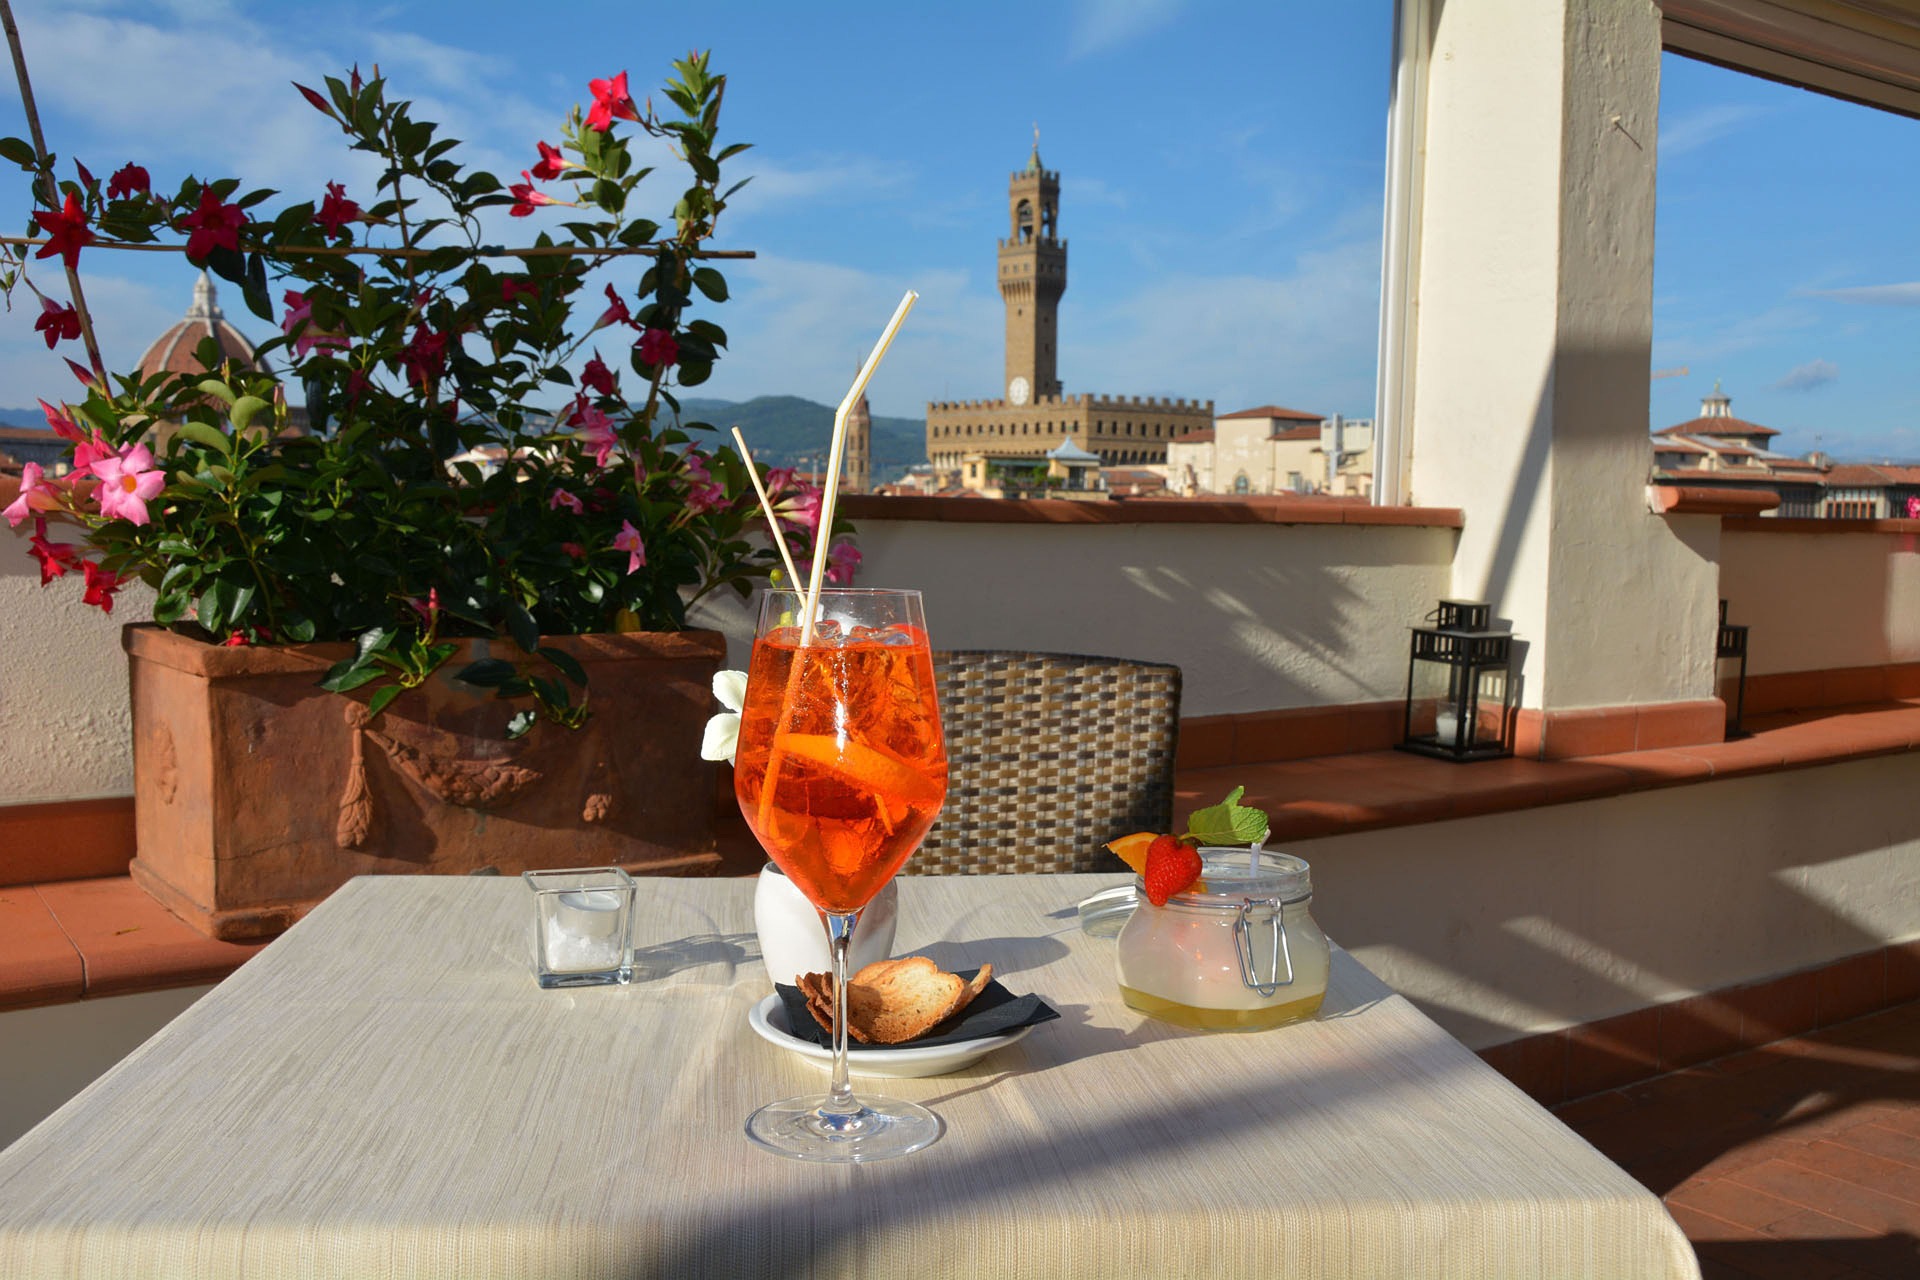 How To Make Aperol Spritz – An Italian's Guide - Mom In Italy